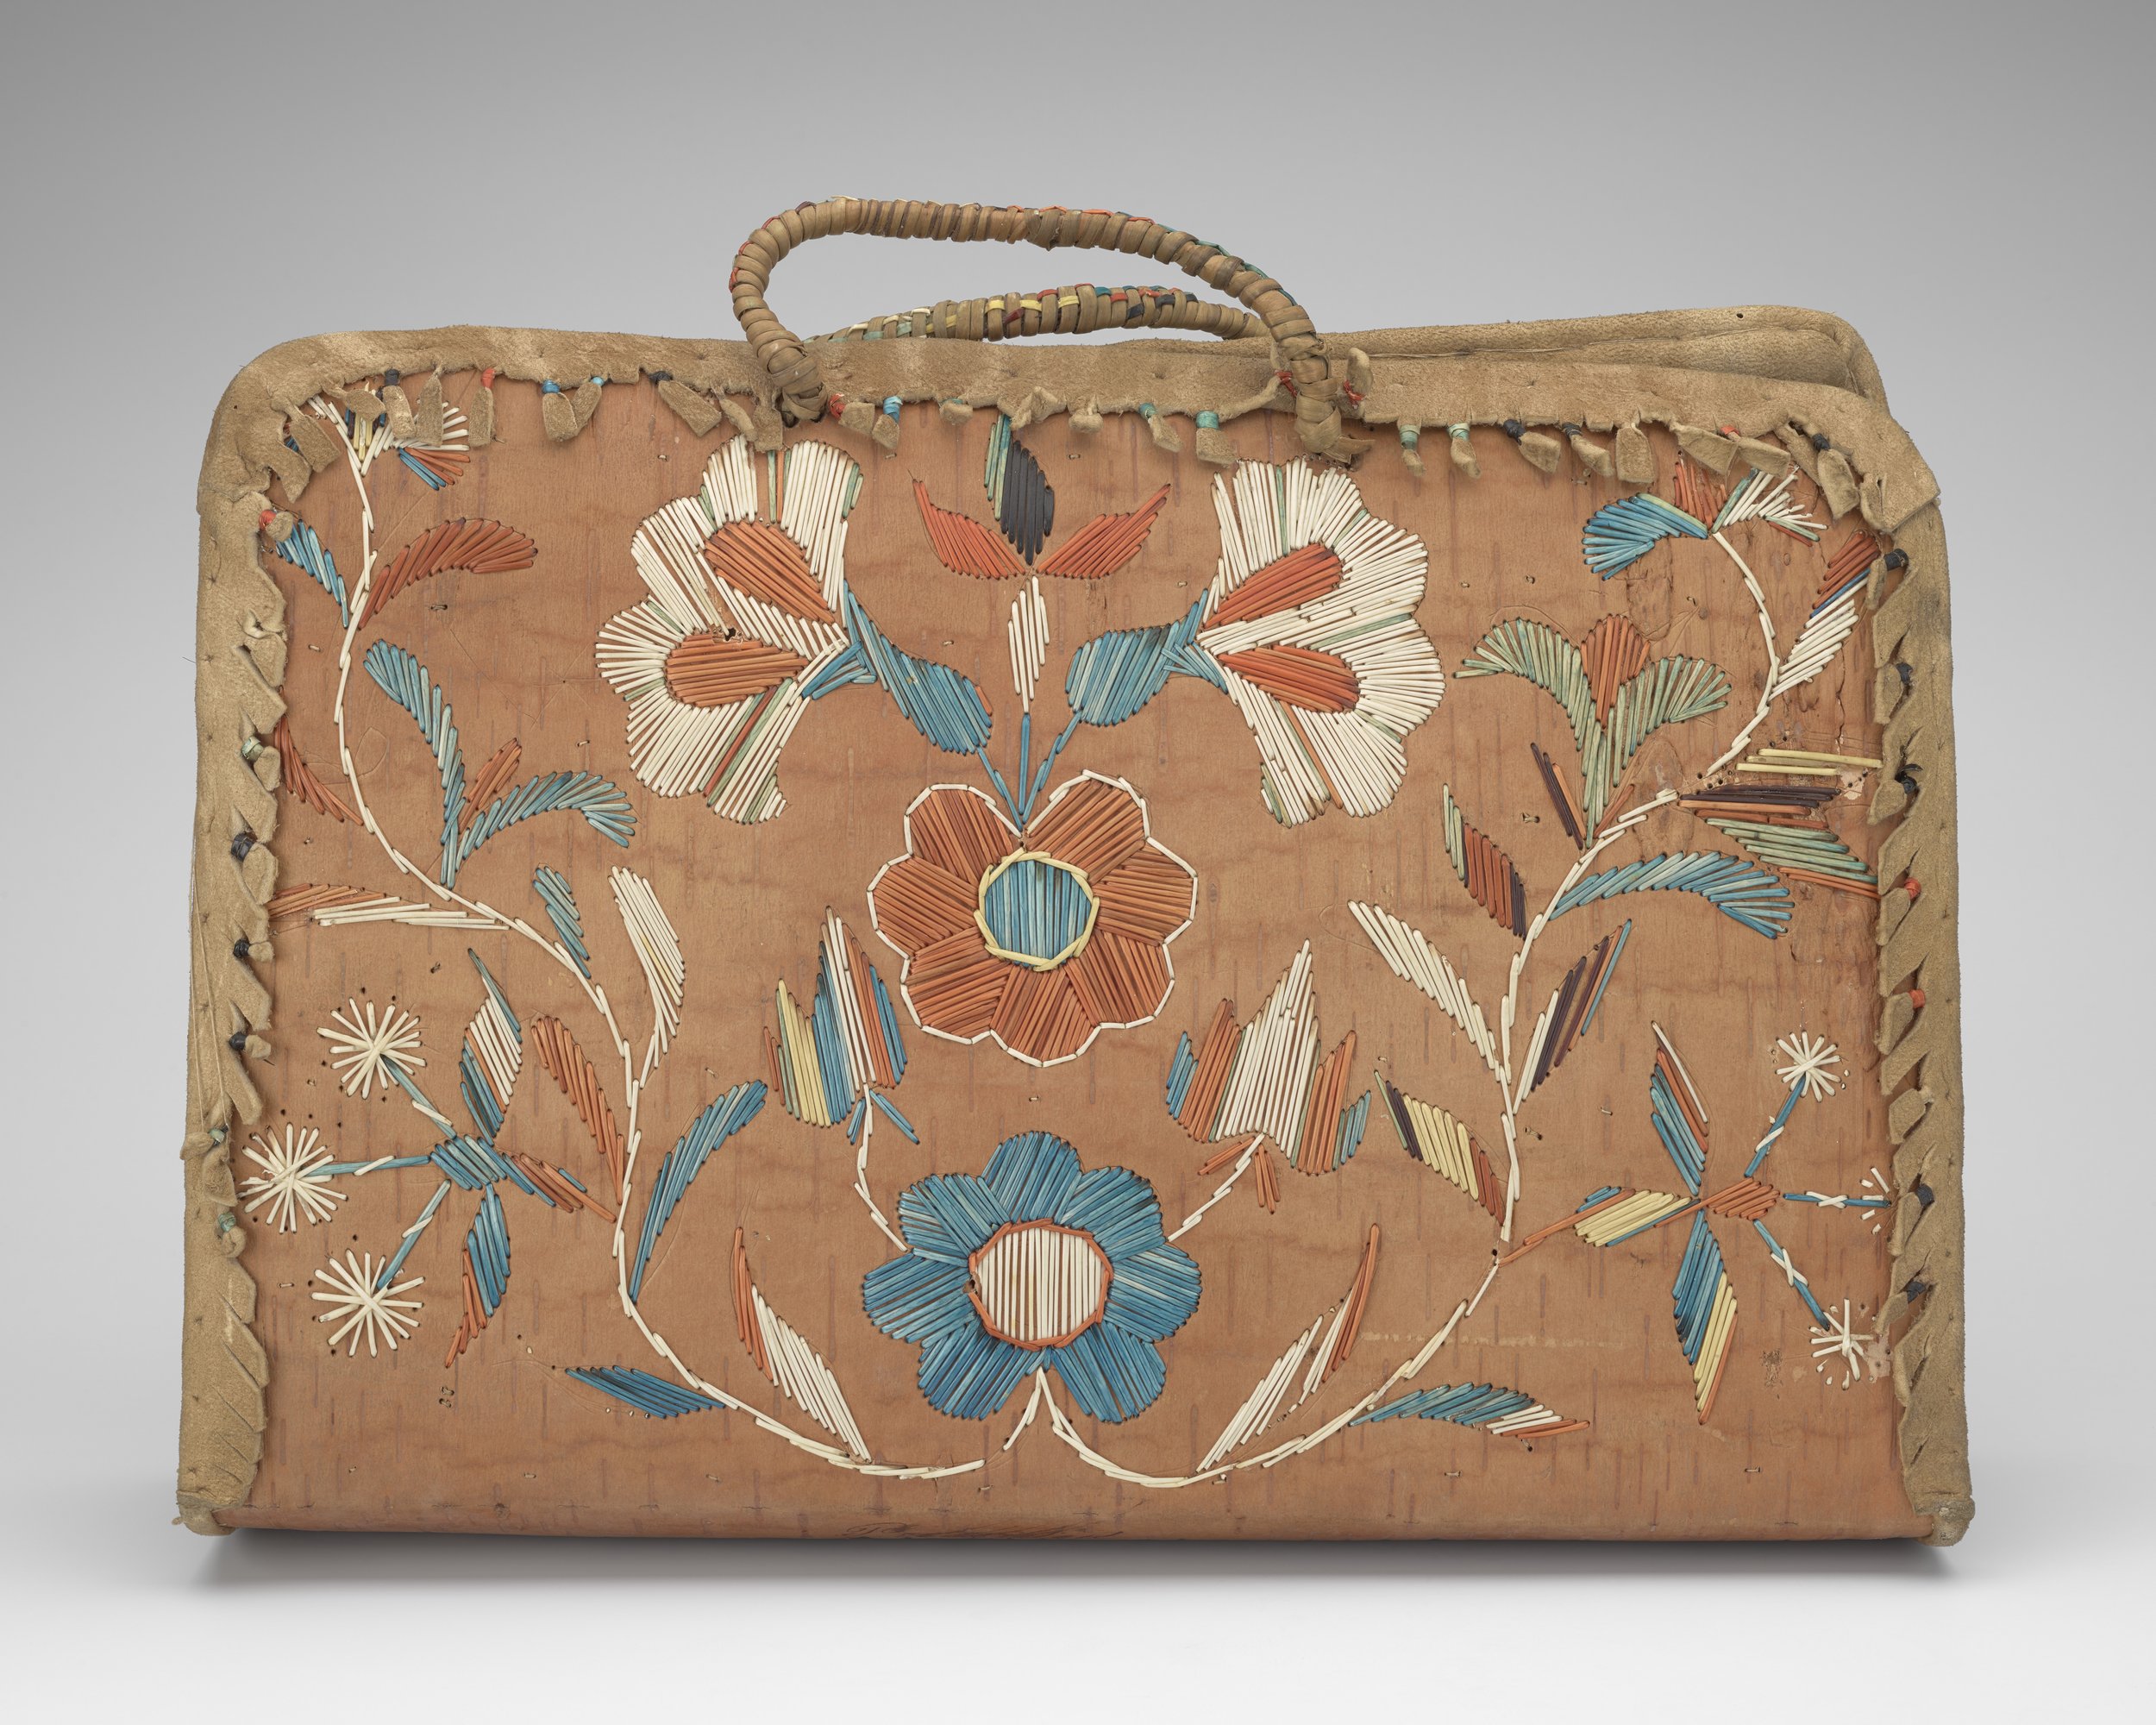 Handbag/Makak made by Margaret Anderson, 1860. Photo courtesy of Royal Collection Trust / © His Majesty King Charles III, 2023.